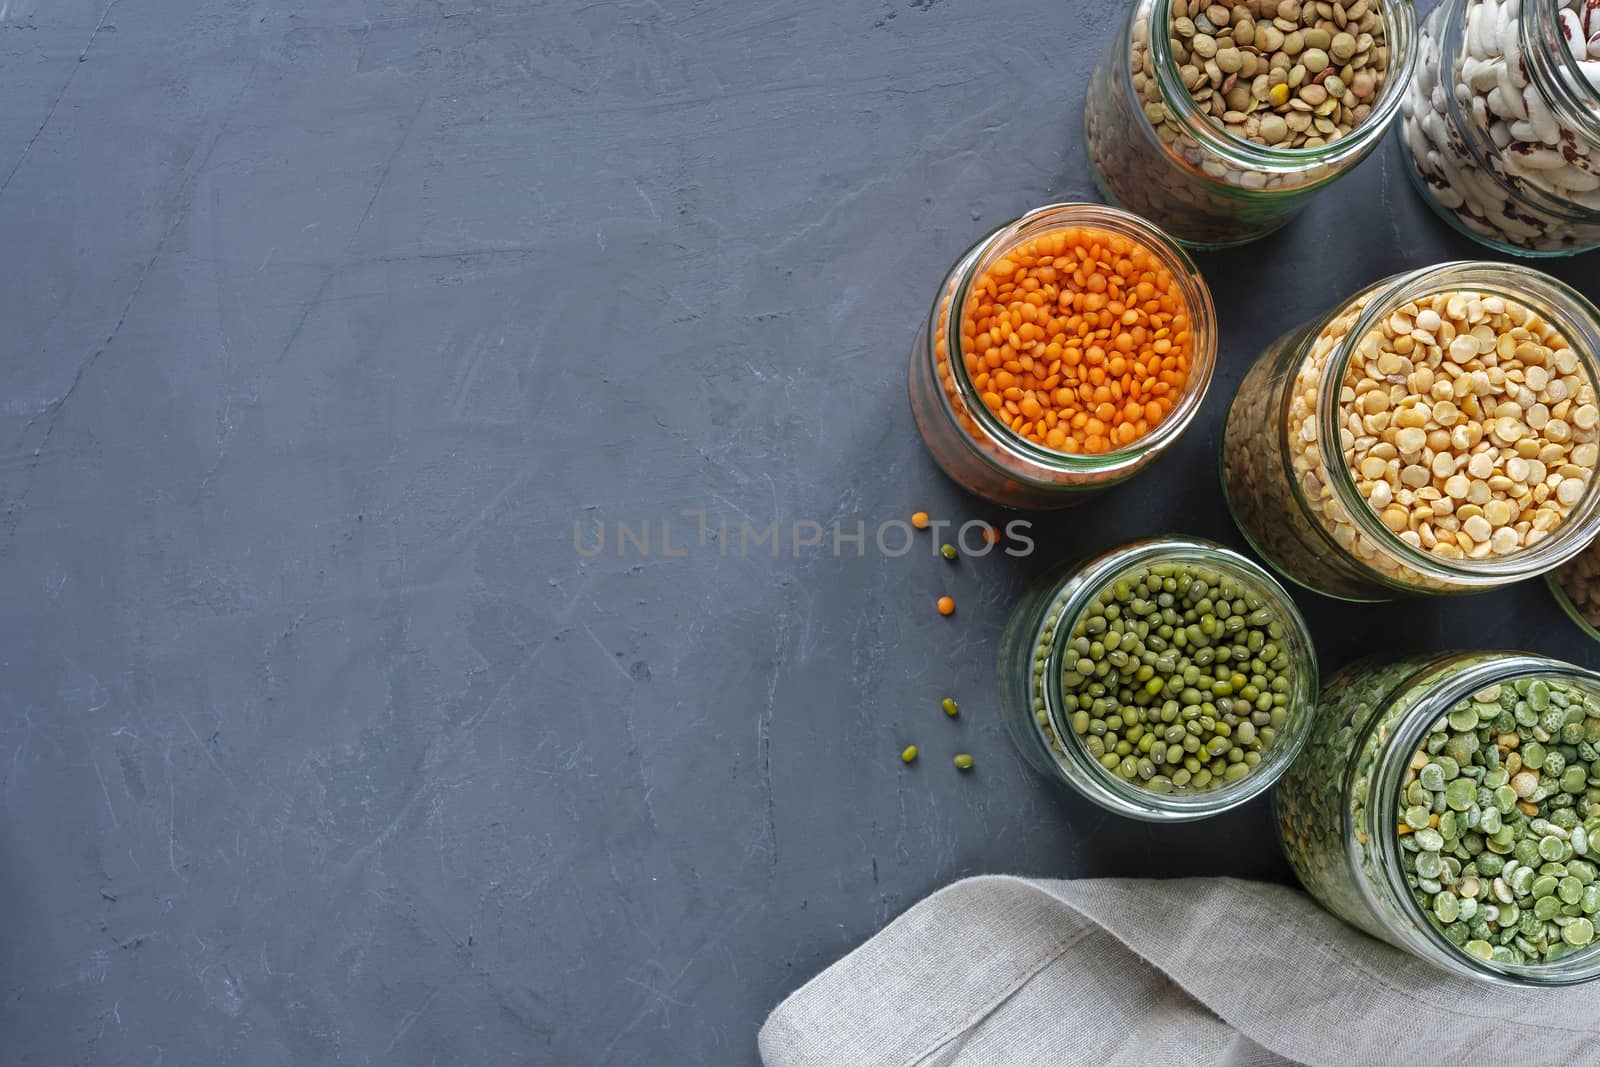 Dried legumes in storage jars on mottled blue background viewed from above with lentils, peas, and beans and copy space